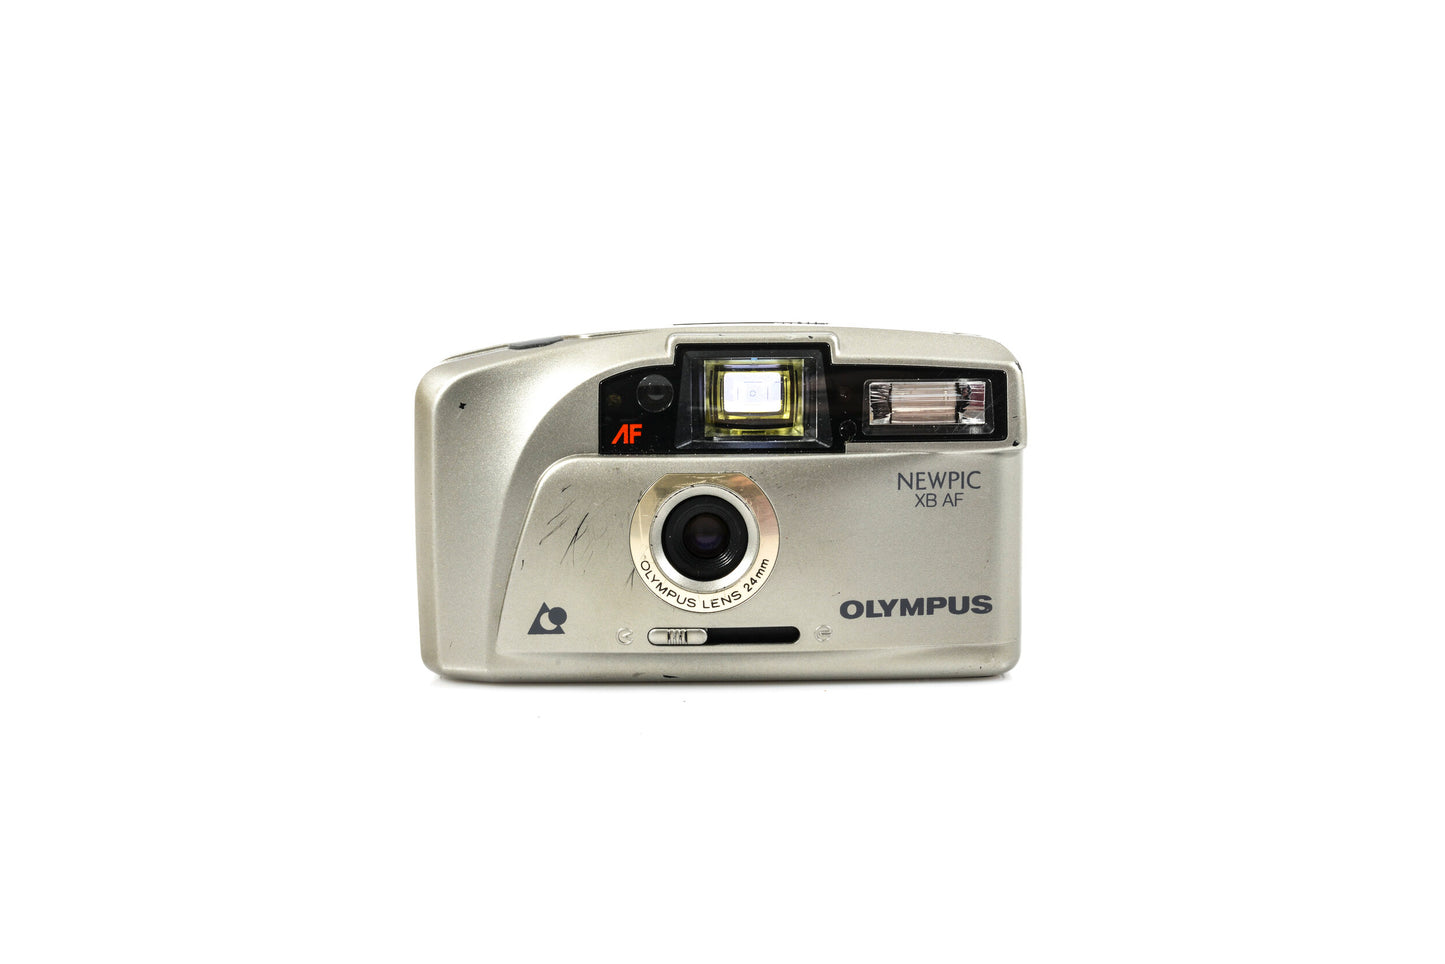 Olympus NEWPIC XB AF 35mm APS Point and Shoot Film Camera